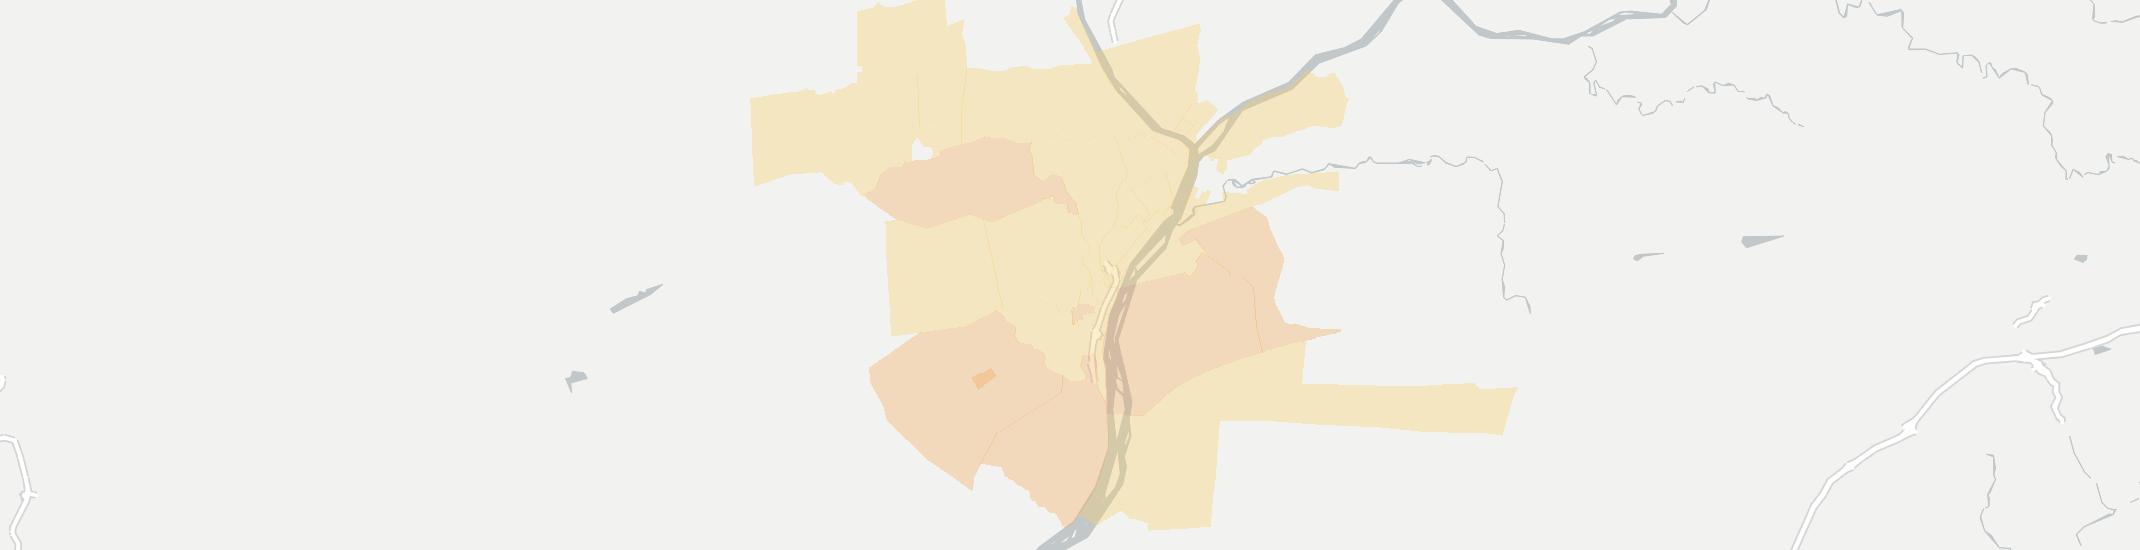 Selinsgrove Internet Competition Map. Click for interactive map.